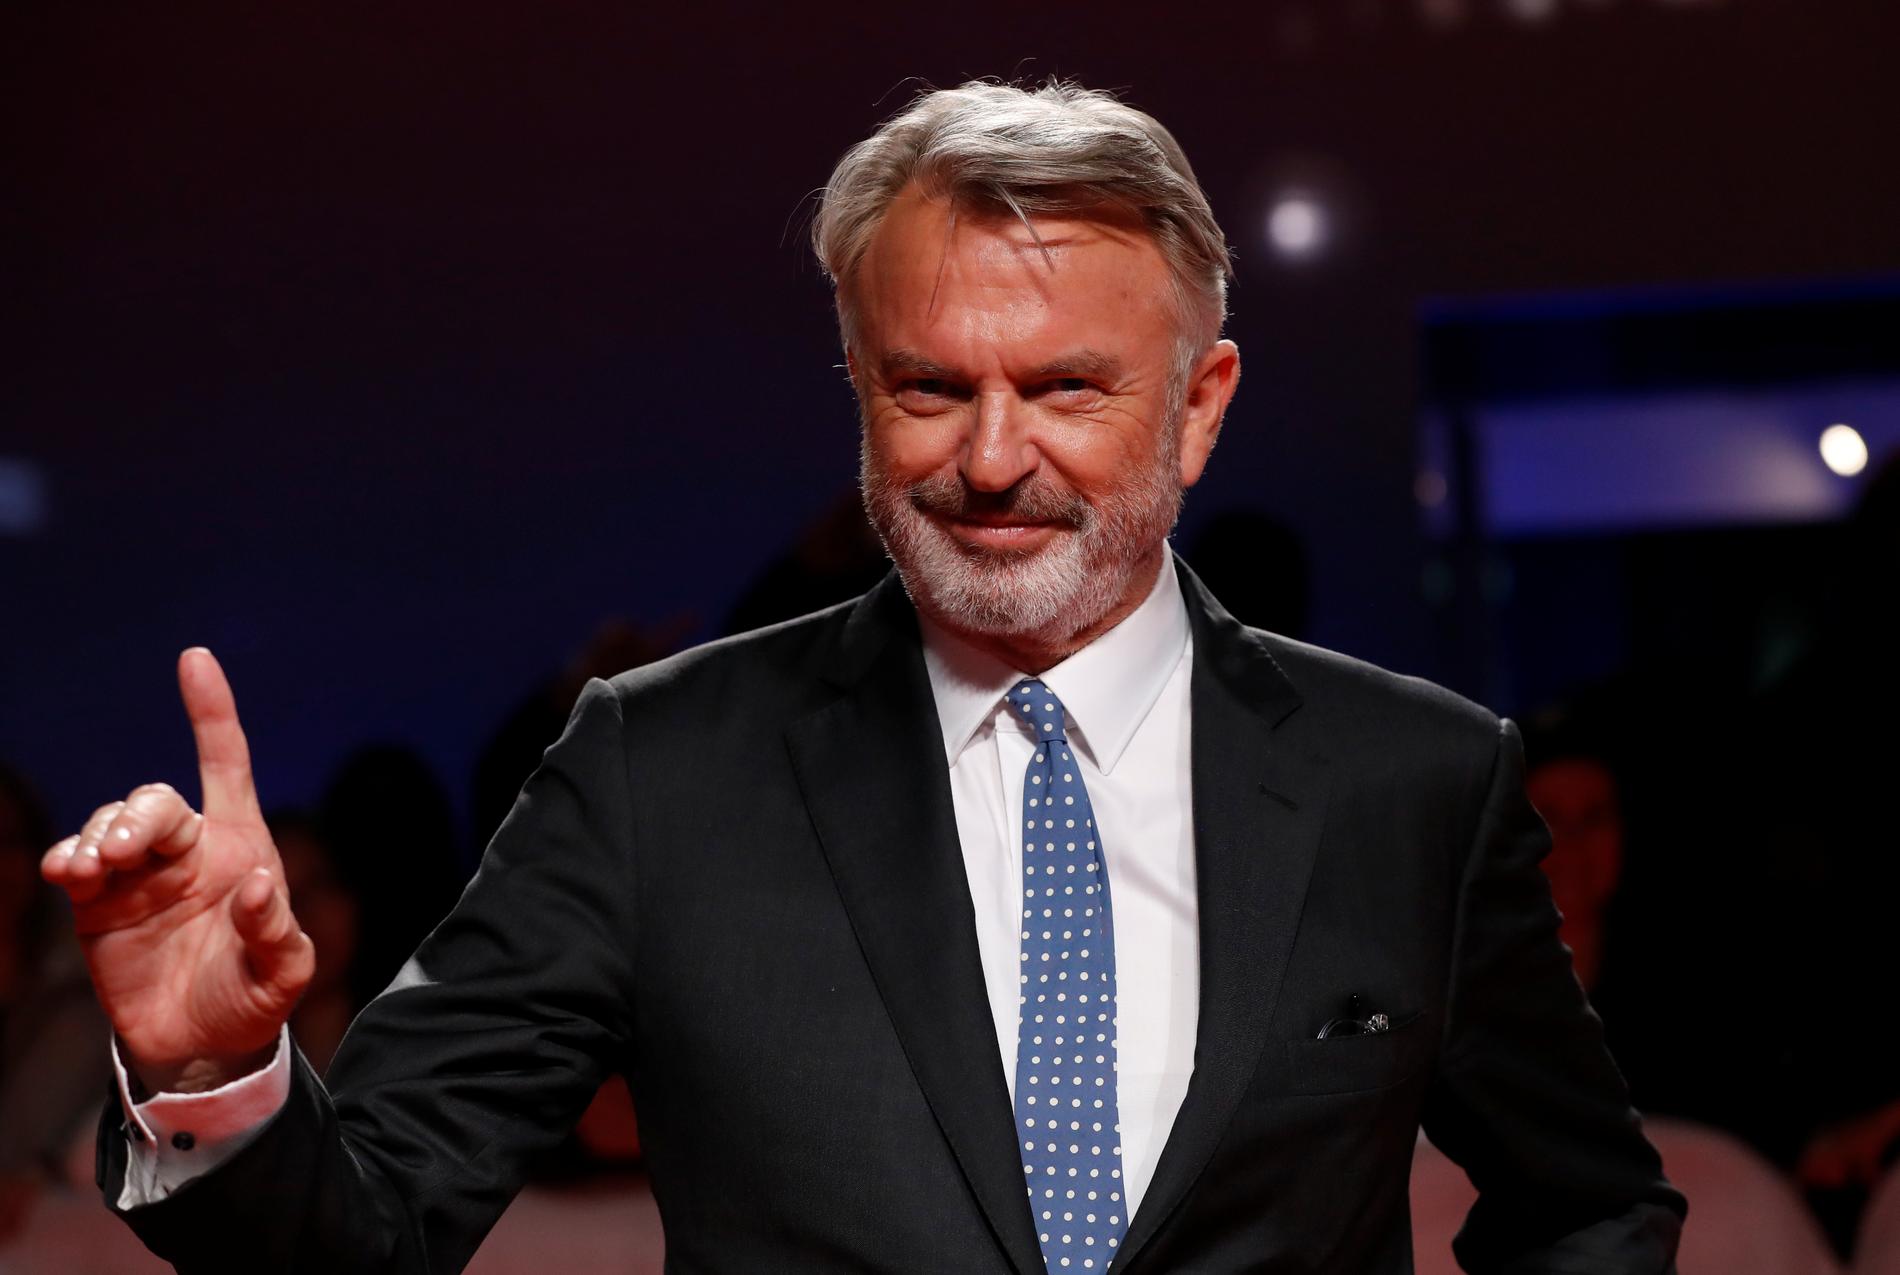 Leukemia patient Sam Neill reveals chance of relapse – apologizes to fans